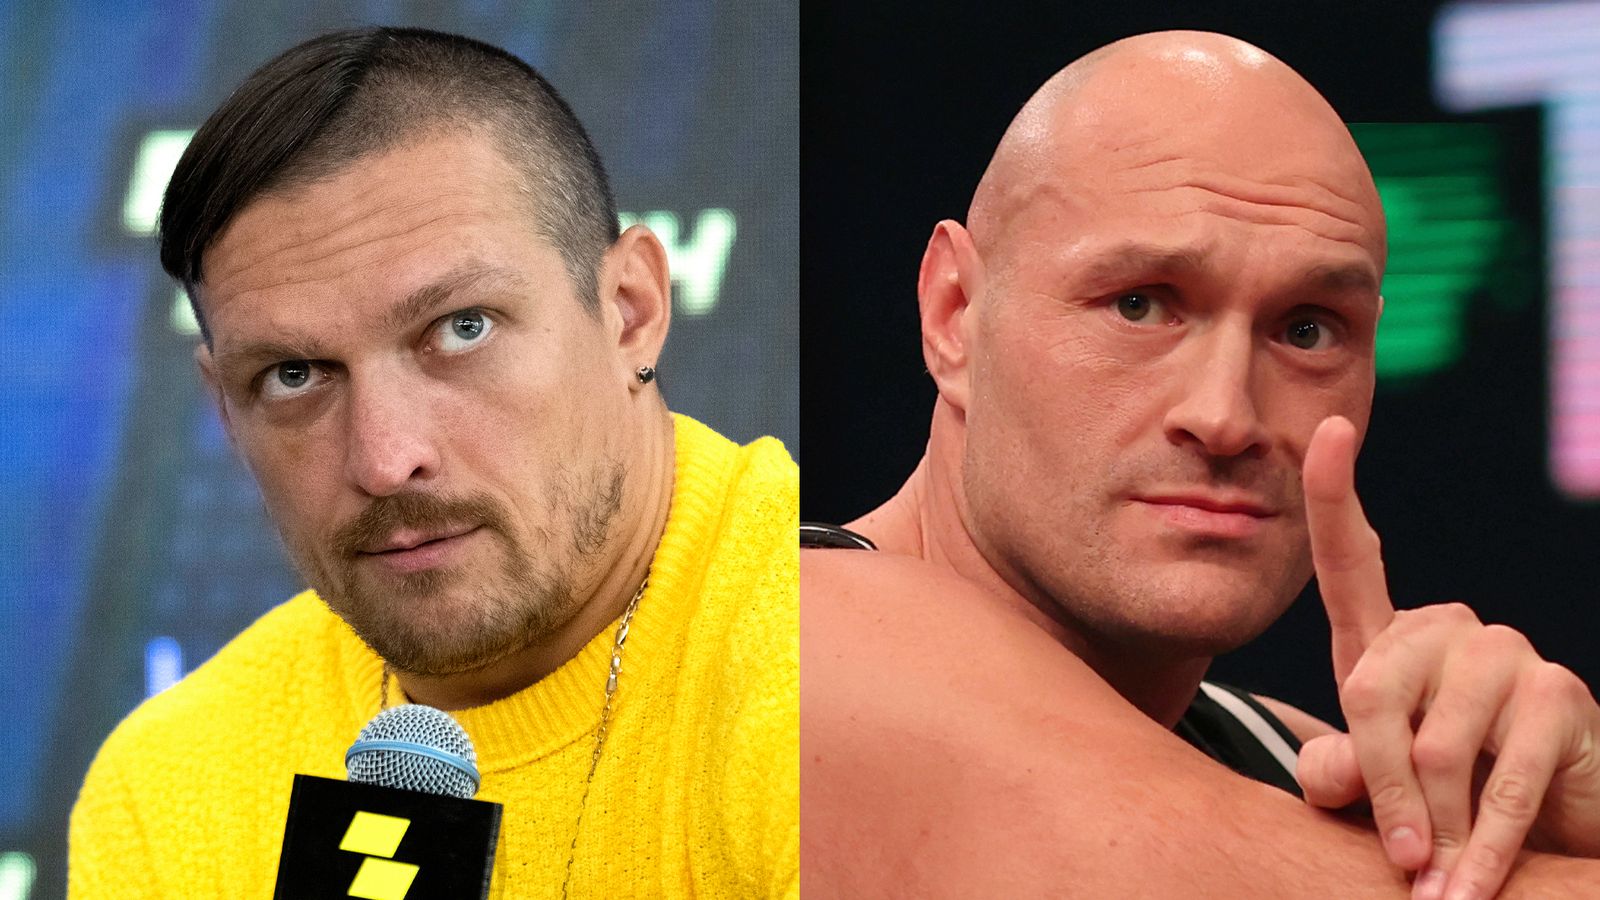 Oleksandr Usyk tells Tyson Fury the ‘clock is ticking’ for him to agree to undisputed heavyweight title fight | Boxing News